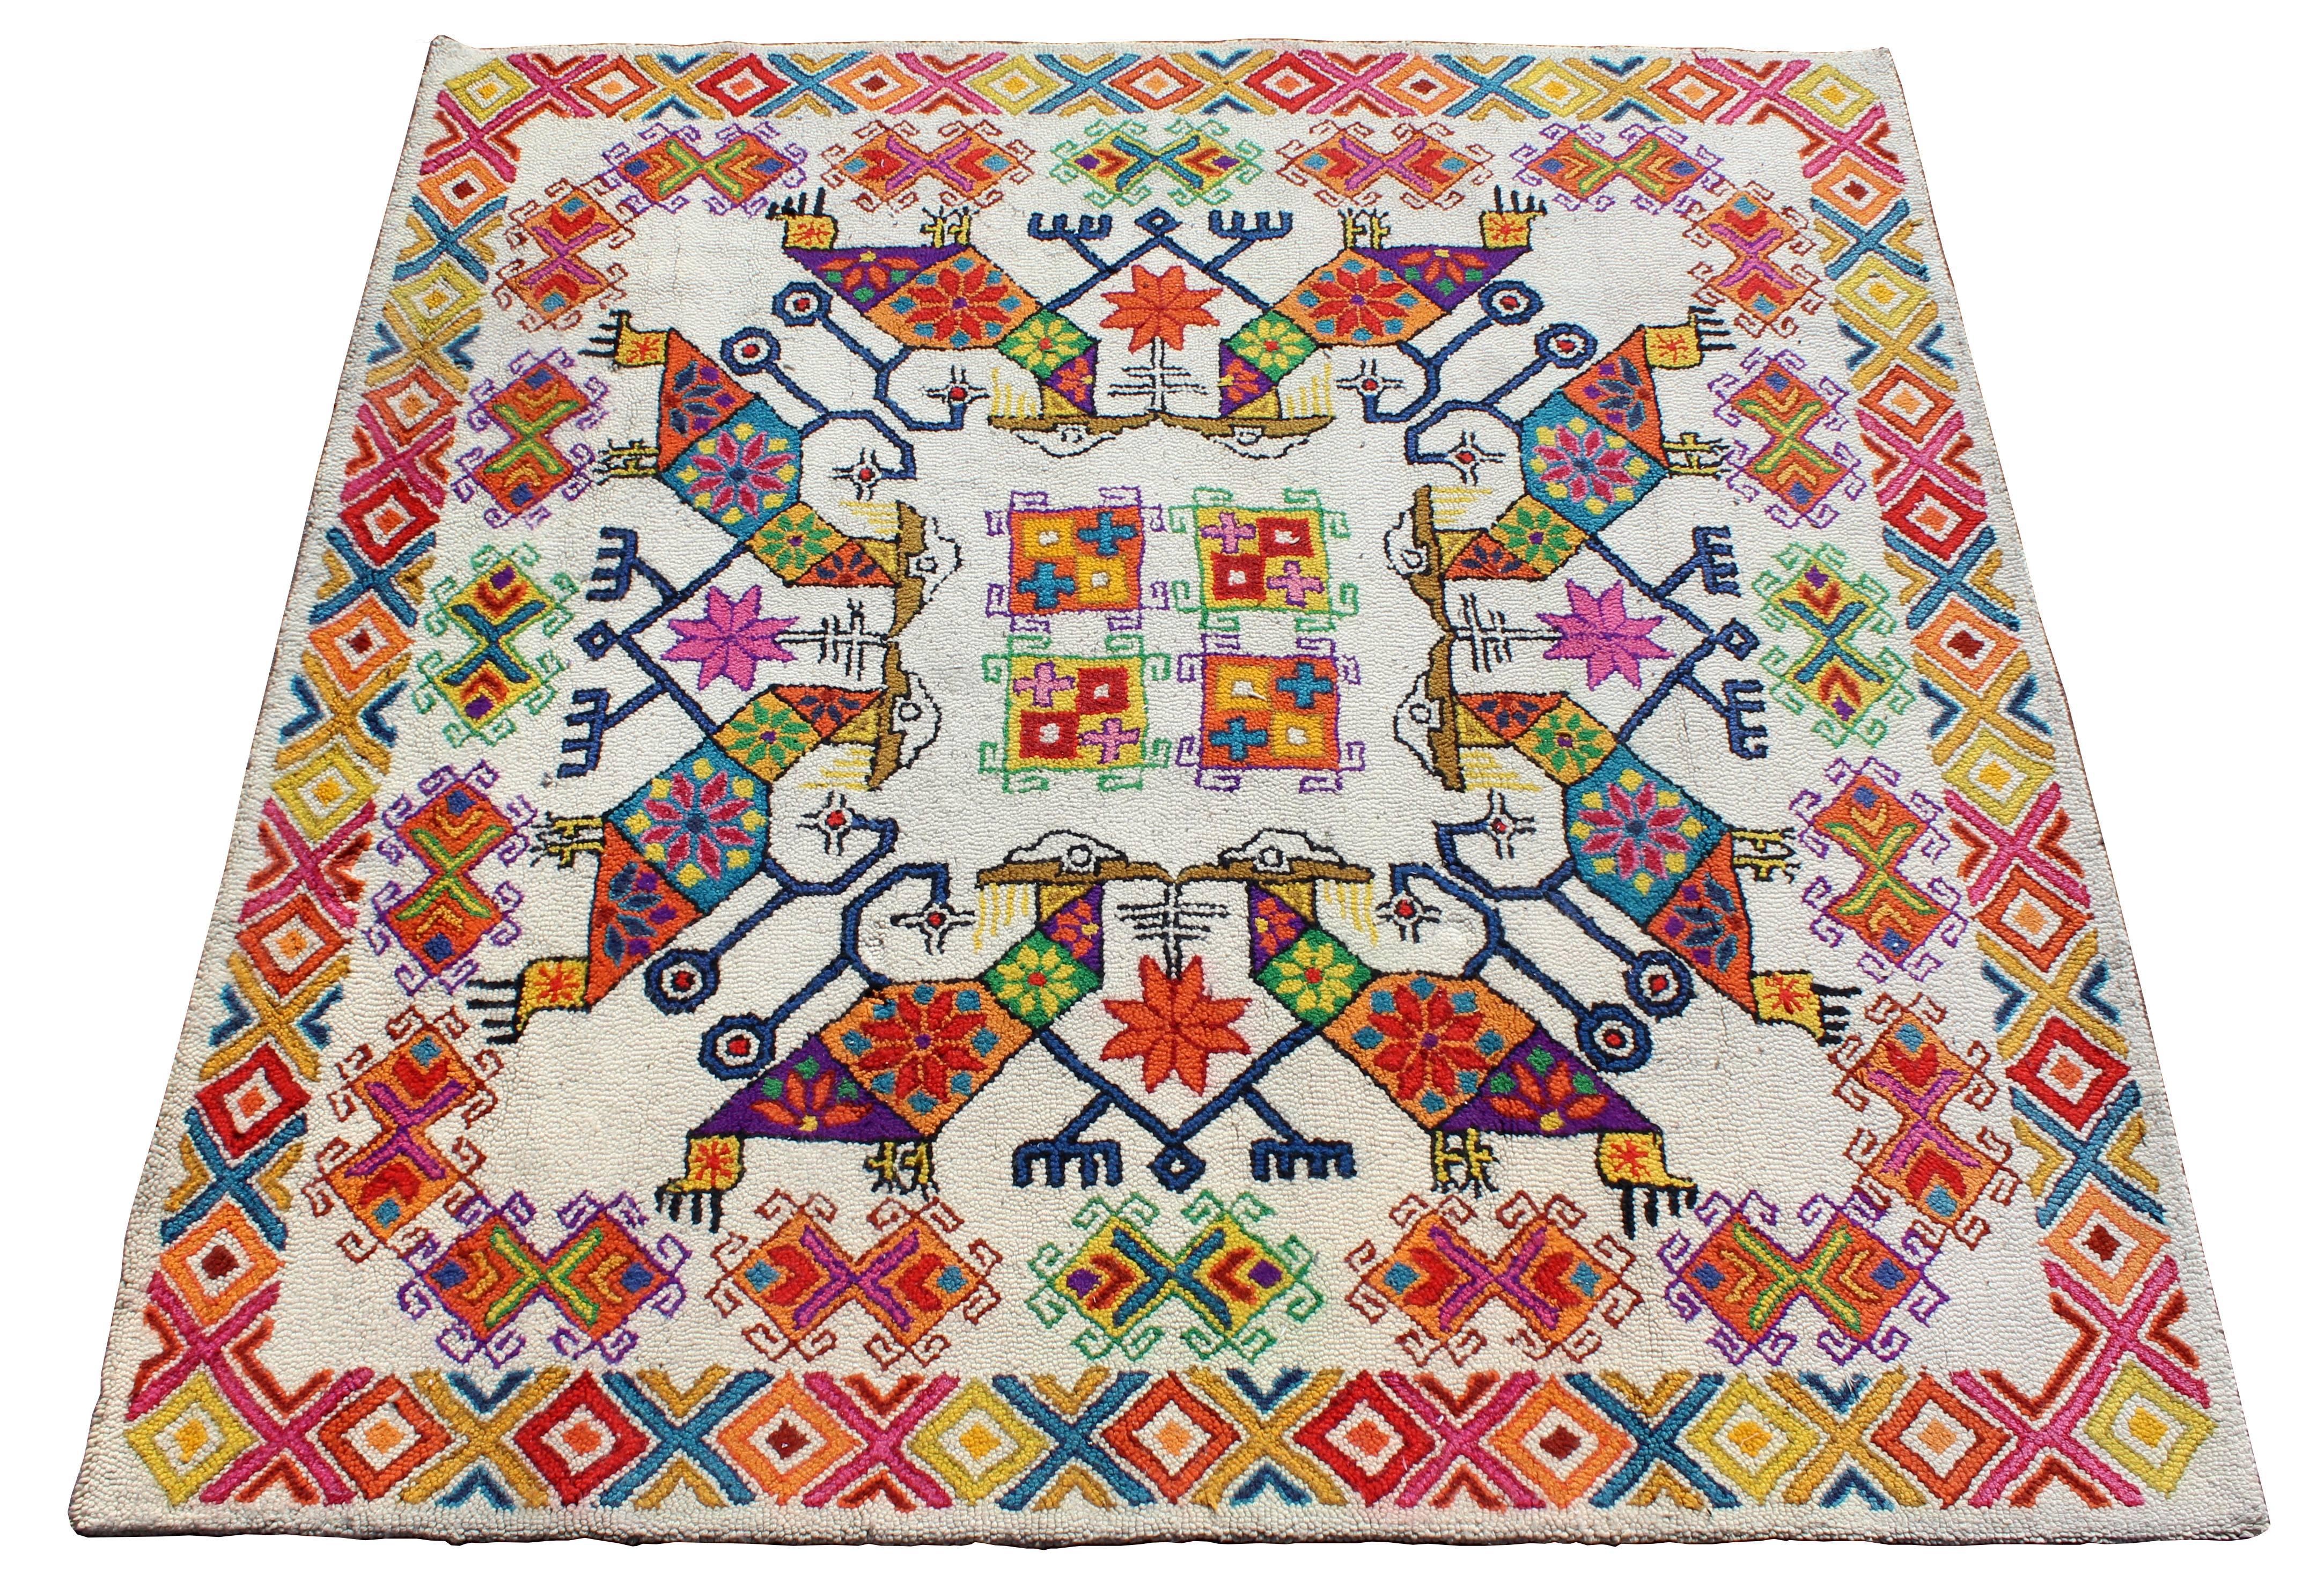 Mexican Area Rug Carpet At 1stdibs, Mexican Area Rugs